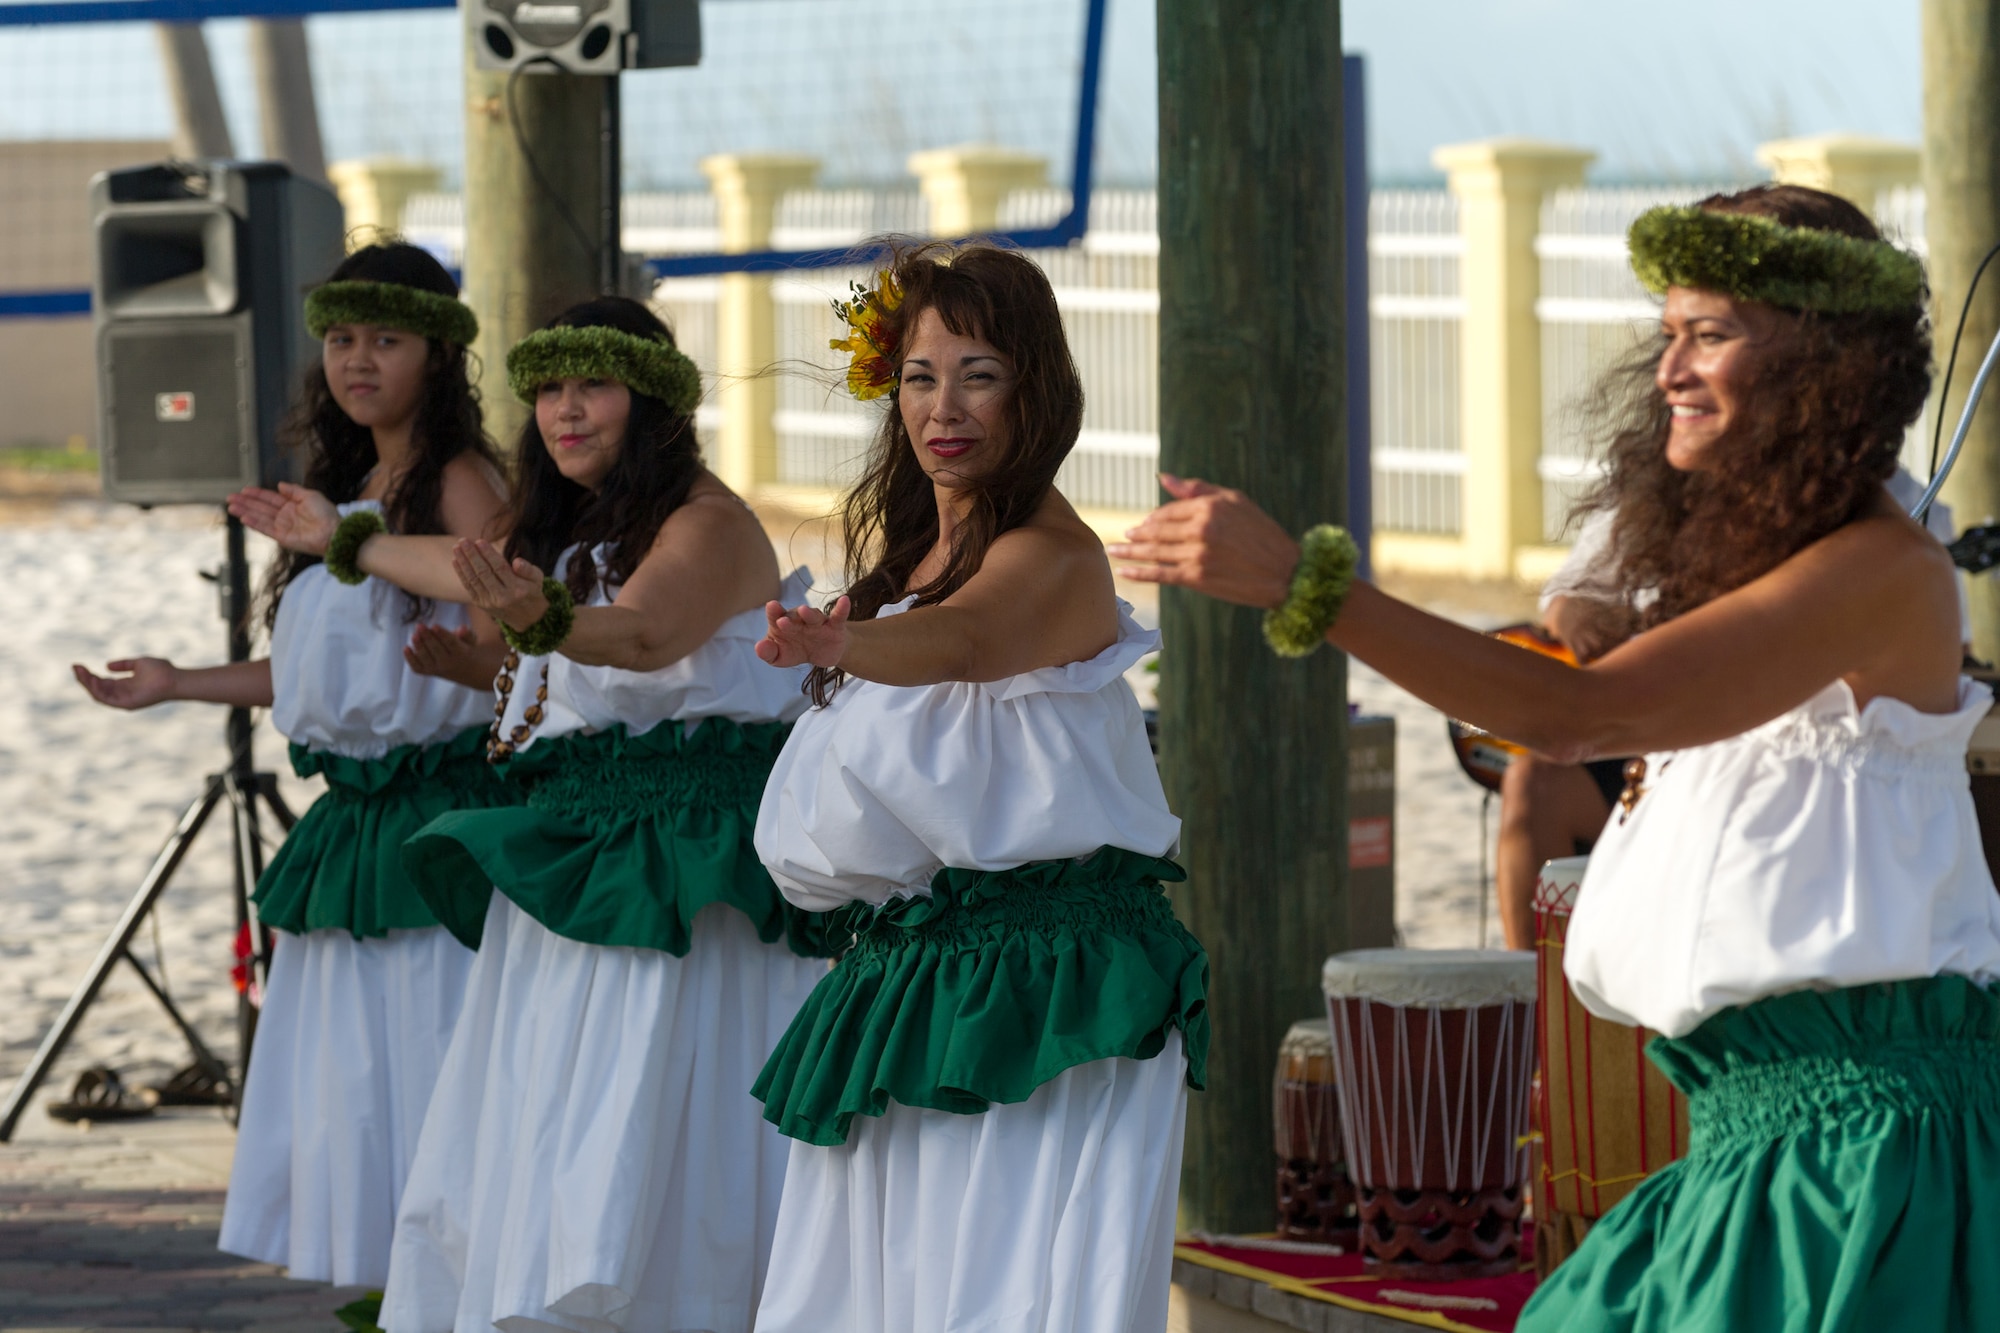 Kumu Pu’uwai Silva, instructor for the Space Coast Hula School, second from the right, performs an ‘Auana, modern hula, for the Asian American and Pacific Islander Heritage Luau May 29, 2015, held at the Beach House at Patrick Air Force Base, Fla. The Luau is part of an observance held annually from May 1 - 31 in celebration of Asian American and Pacific Islander Heritage Month. (U.S. Air Force photo/Cory Long) (Released)